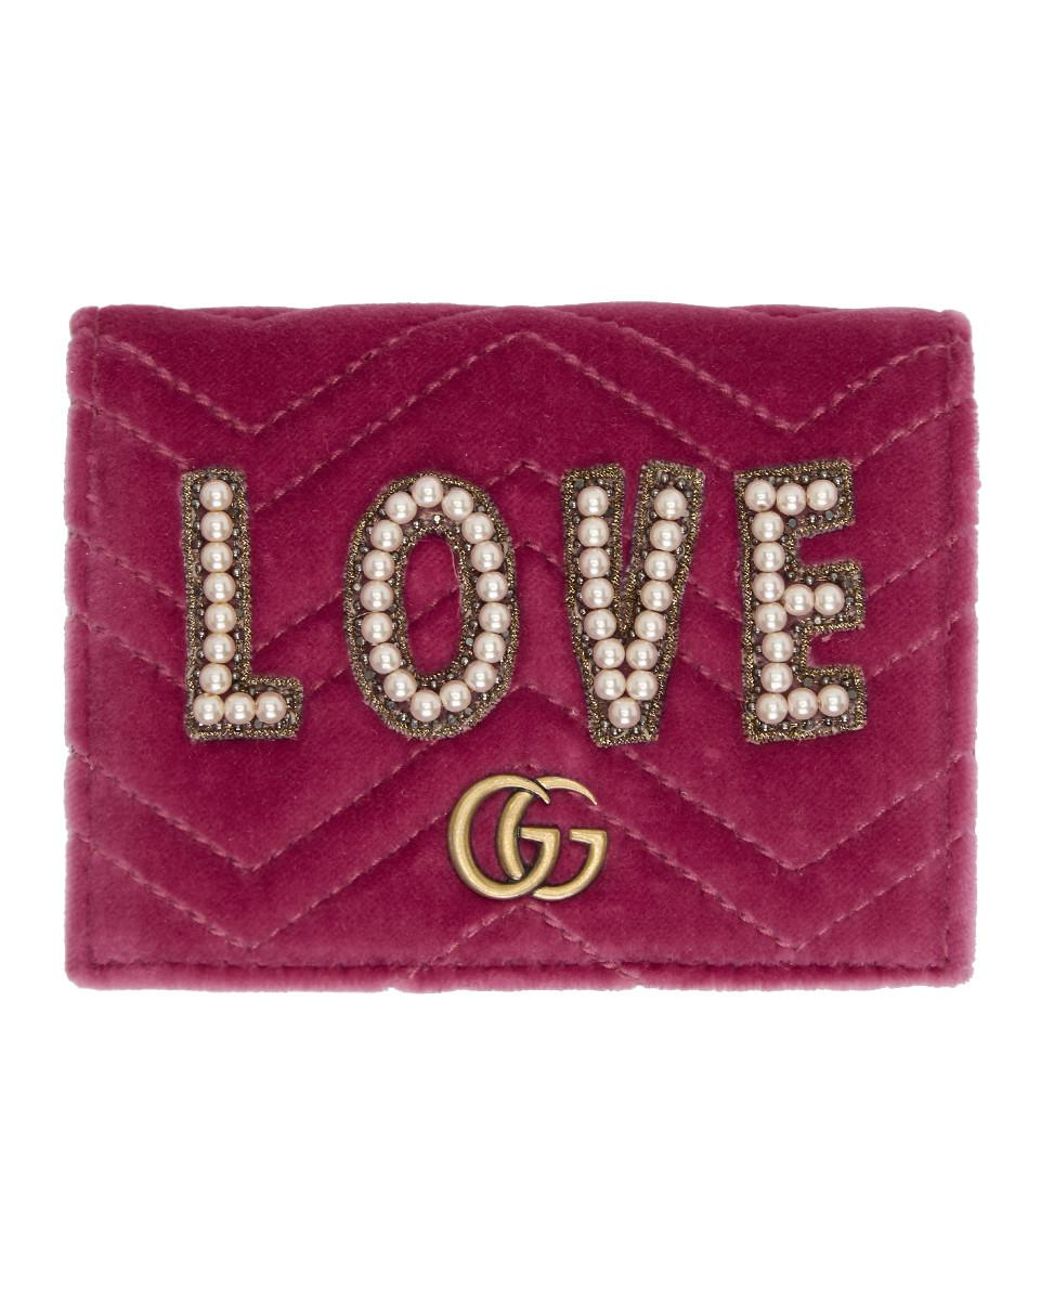 Gucci Vintage Light Pink Limited Edition GG Marmont Floral Compact Wallet, Best Price and Reviews